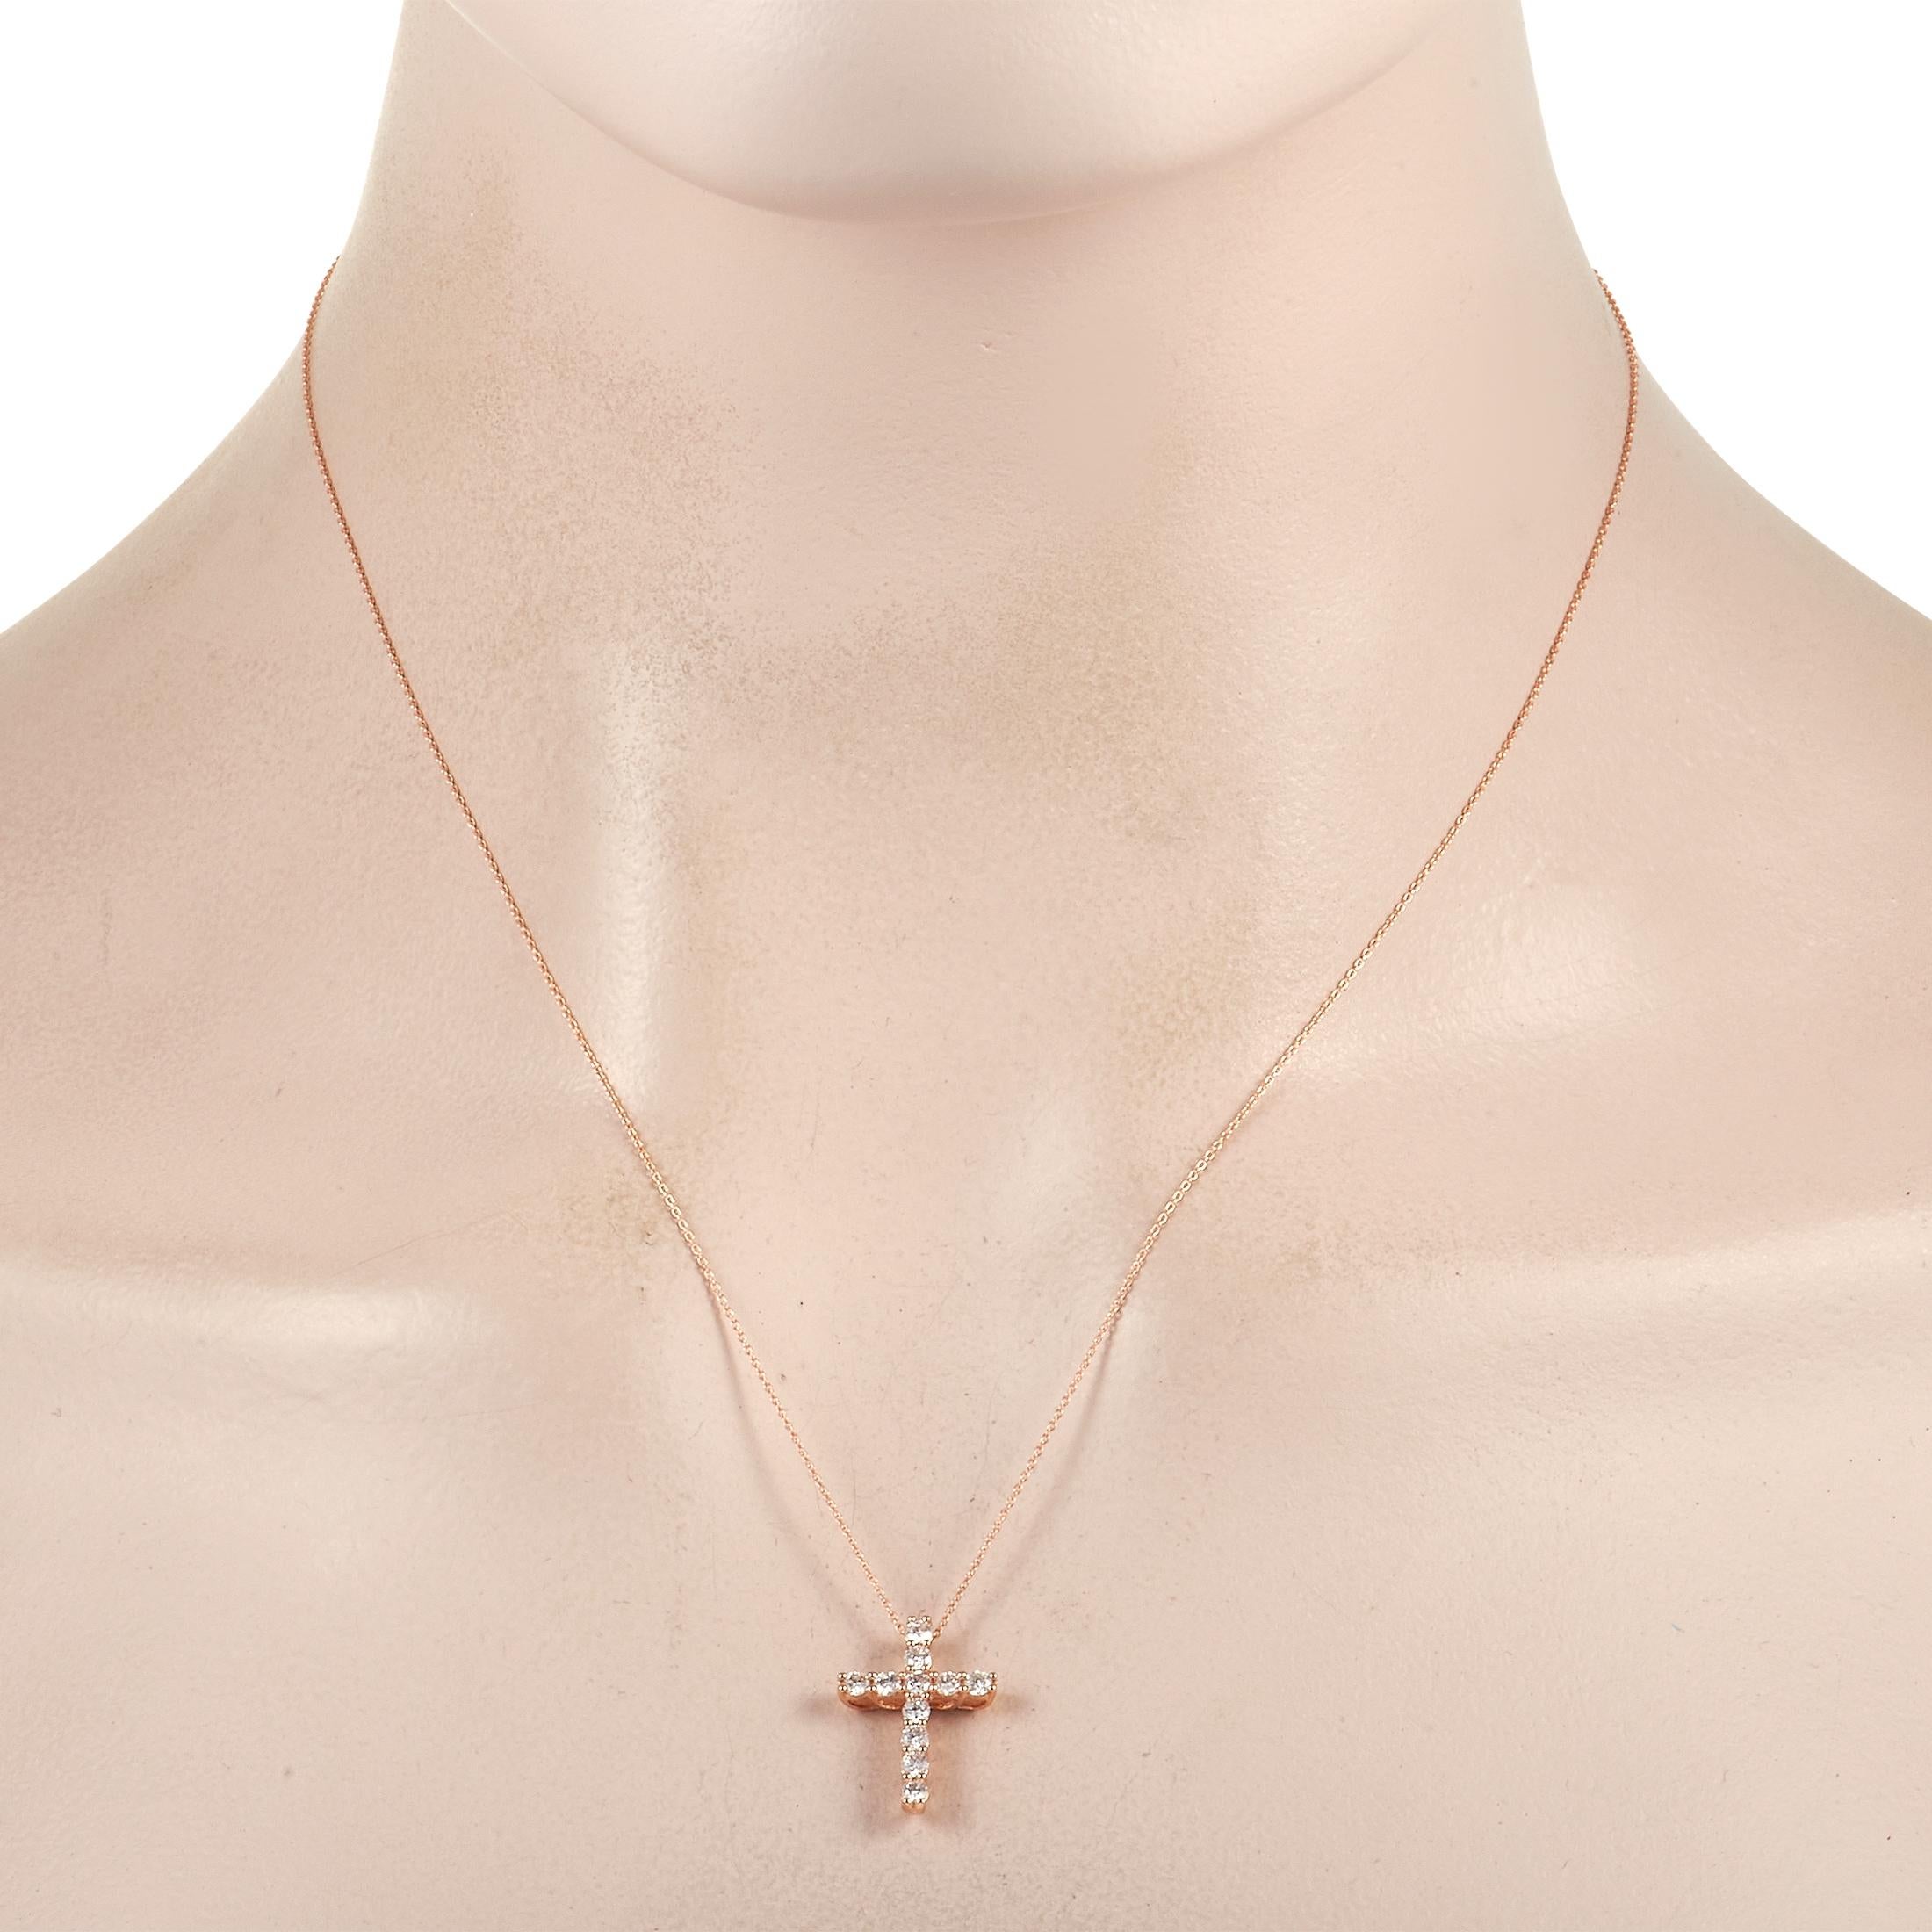 Keep your faith close to your heart with this impeccable pendant necklace. The iconic cross-shaped pendant measures 0.75” long, 0.5” wide, and comes to life thanks to a series of sparkling diamonds with a total weight of 0.52 carats. It’s crafted